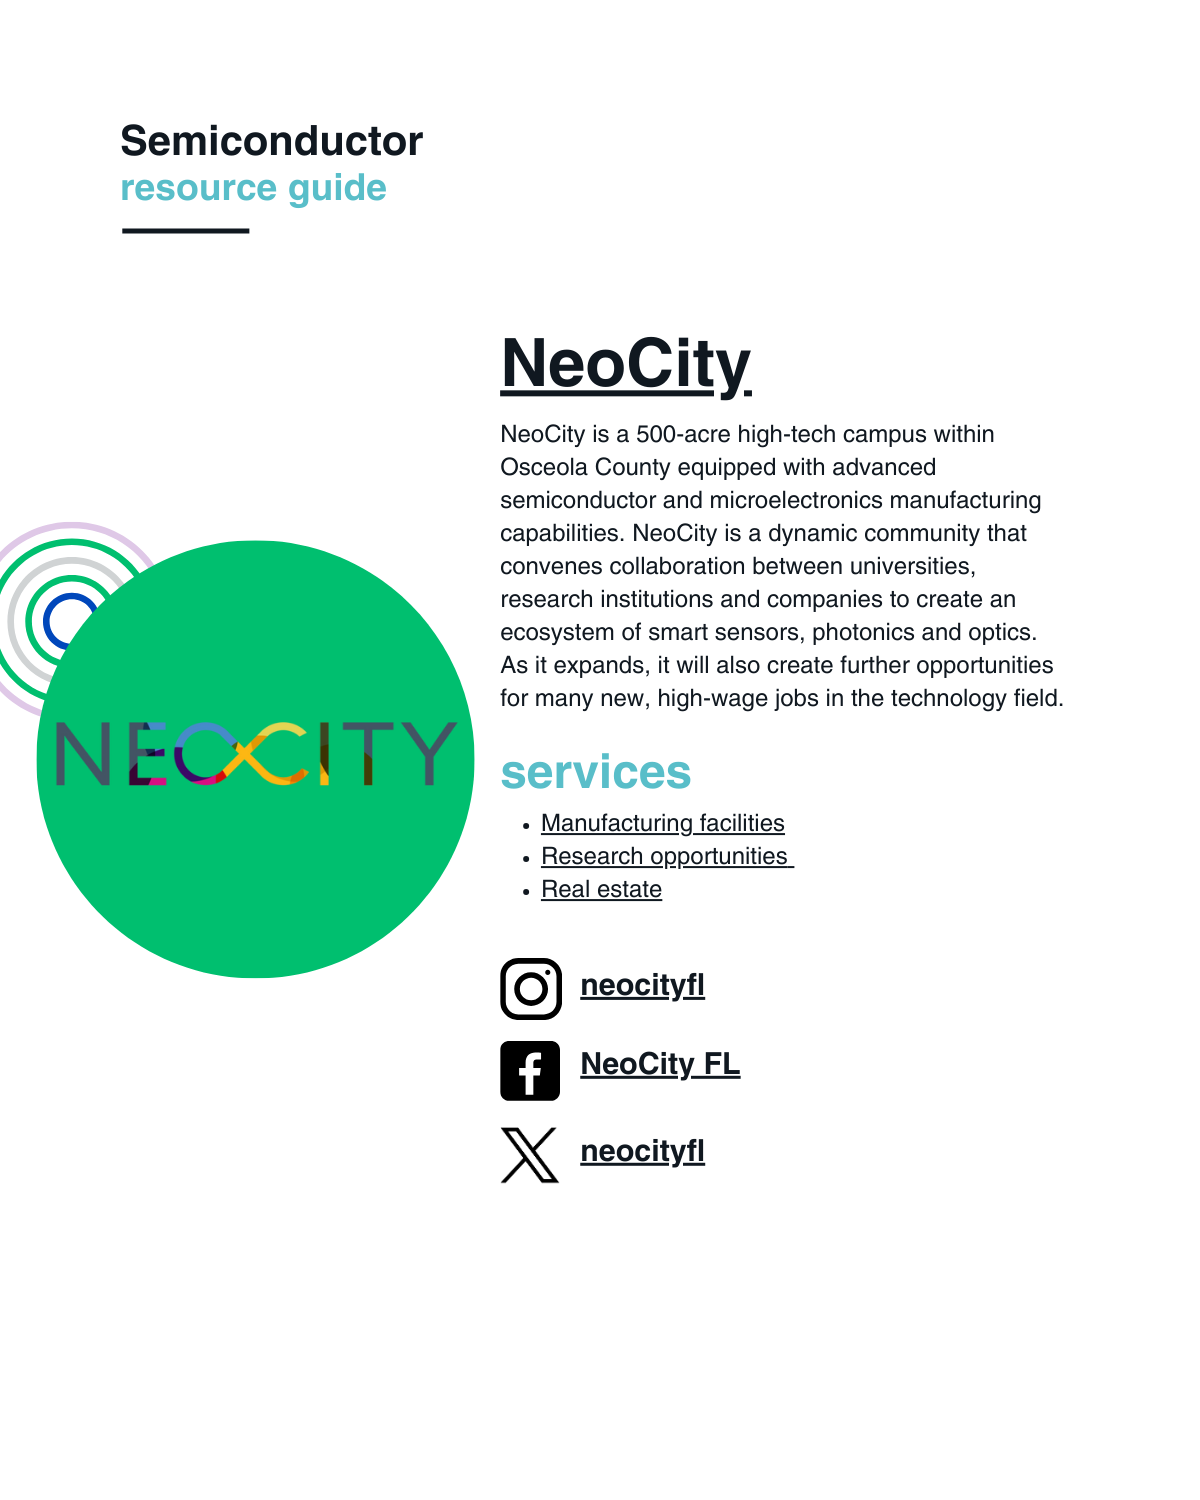 NeoCity is a 500-acre high-tech campus within Osceola County equipped with advanced semiconductor and microelectronics manufacturing capabilities. NeoCity is a dynamic community that convenes collaboration between universities, research institutions and companies to create an ecosystem of smart sensors, photonics and optics. As it expands, it will also create further opportunities for many new, high-wage jobs in the technology field.